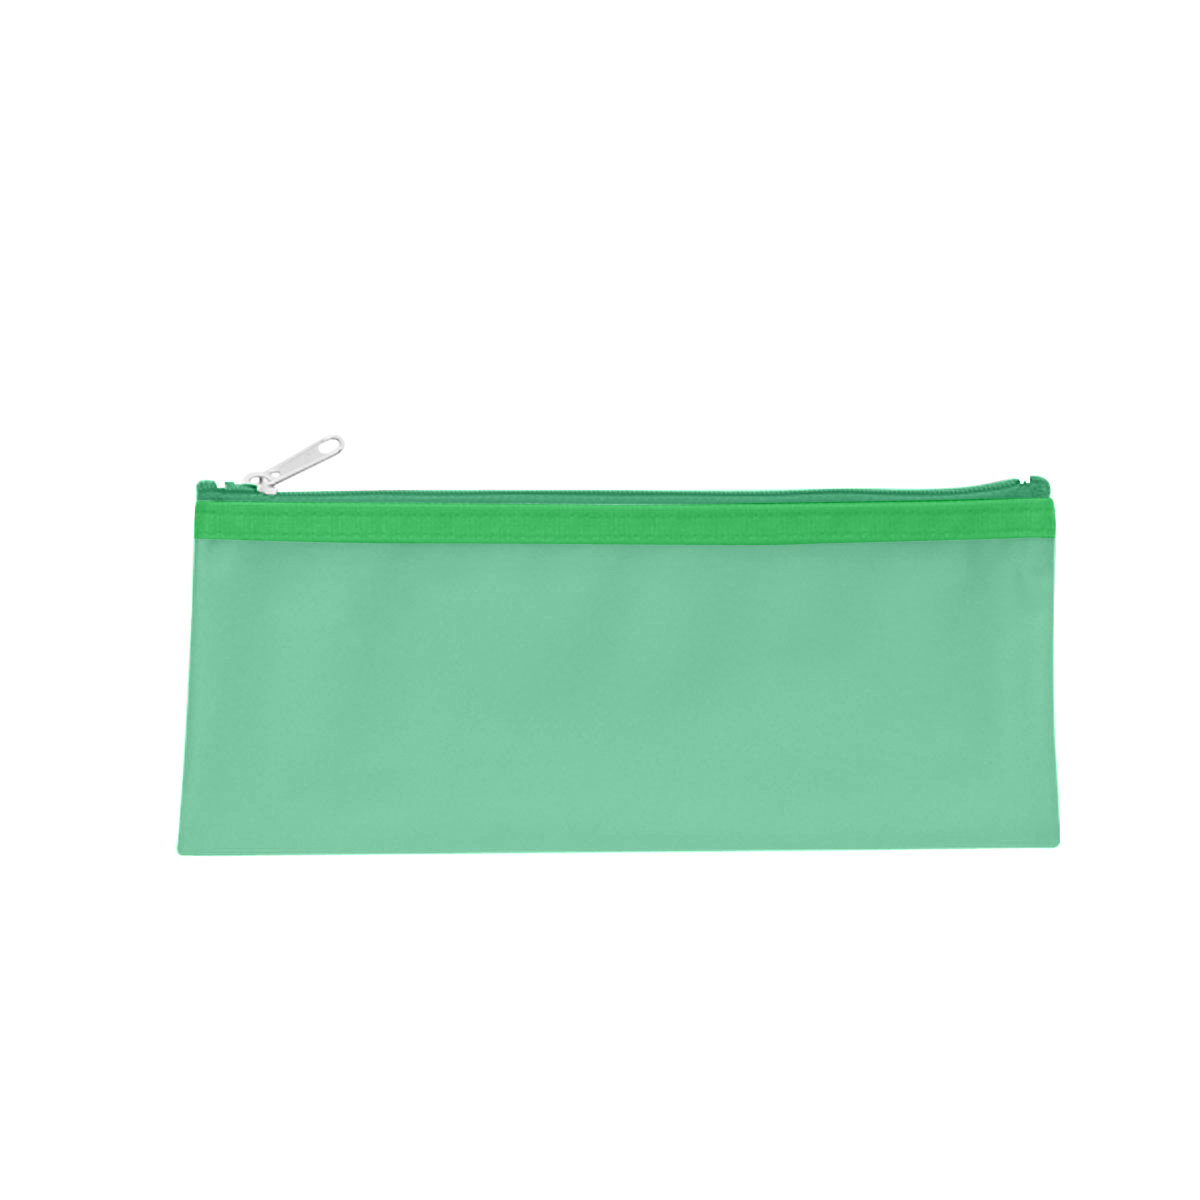 Pencil Pouch  EverythingBranded USA